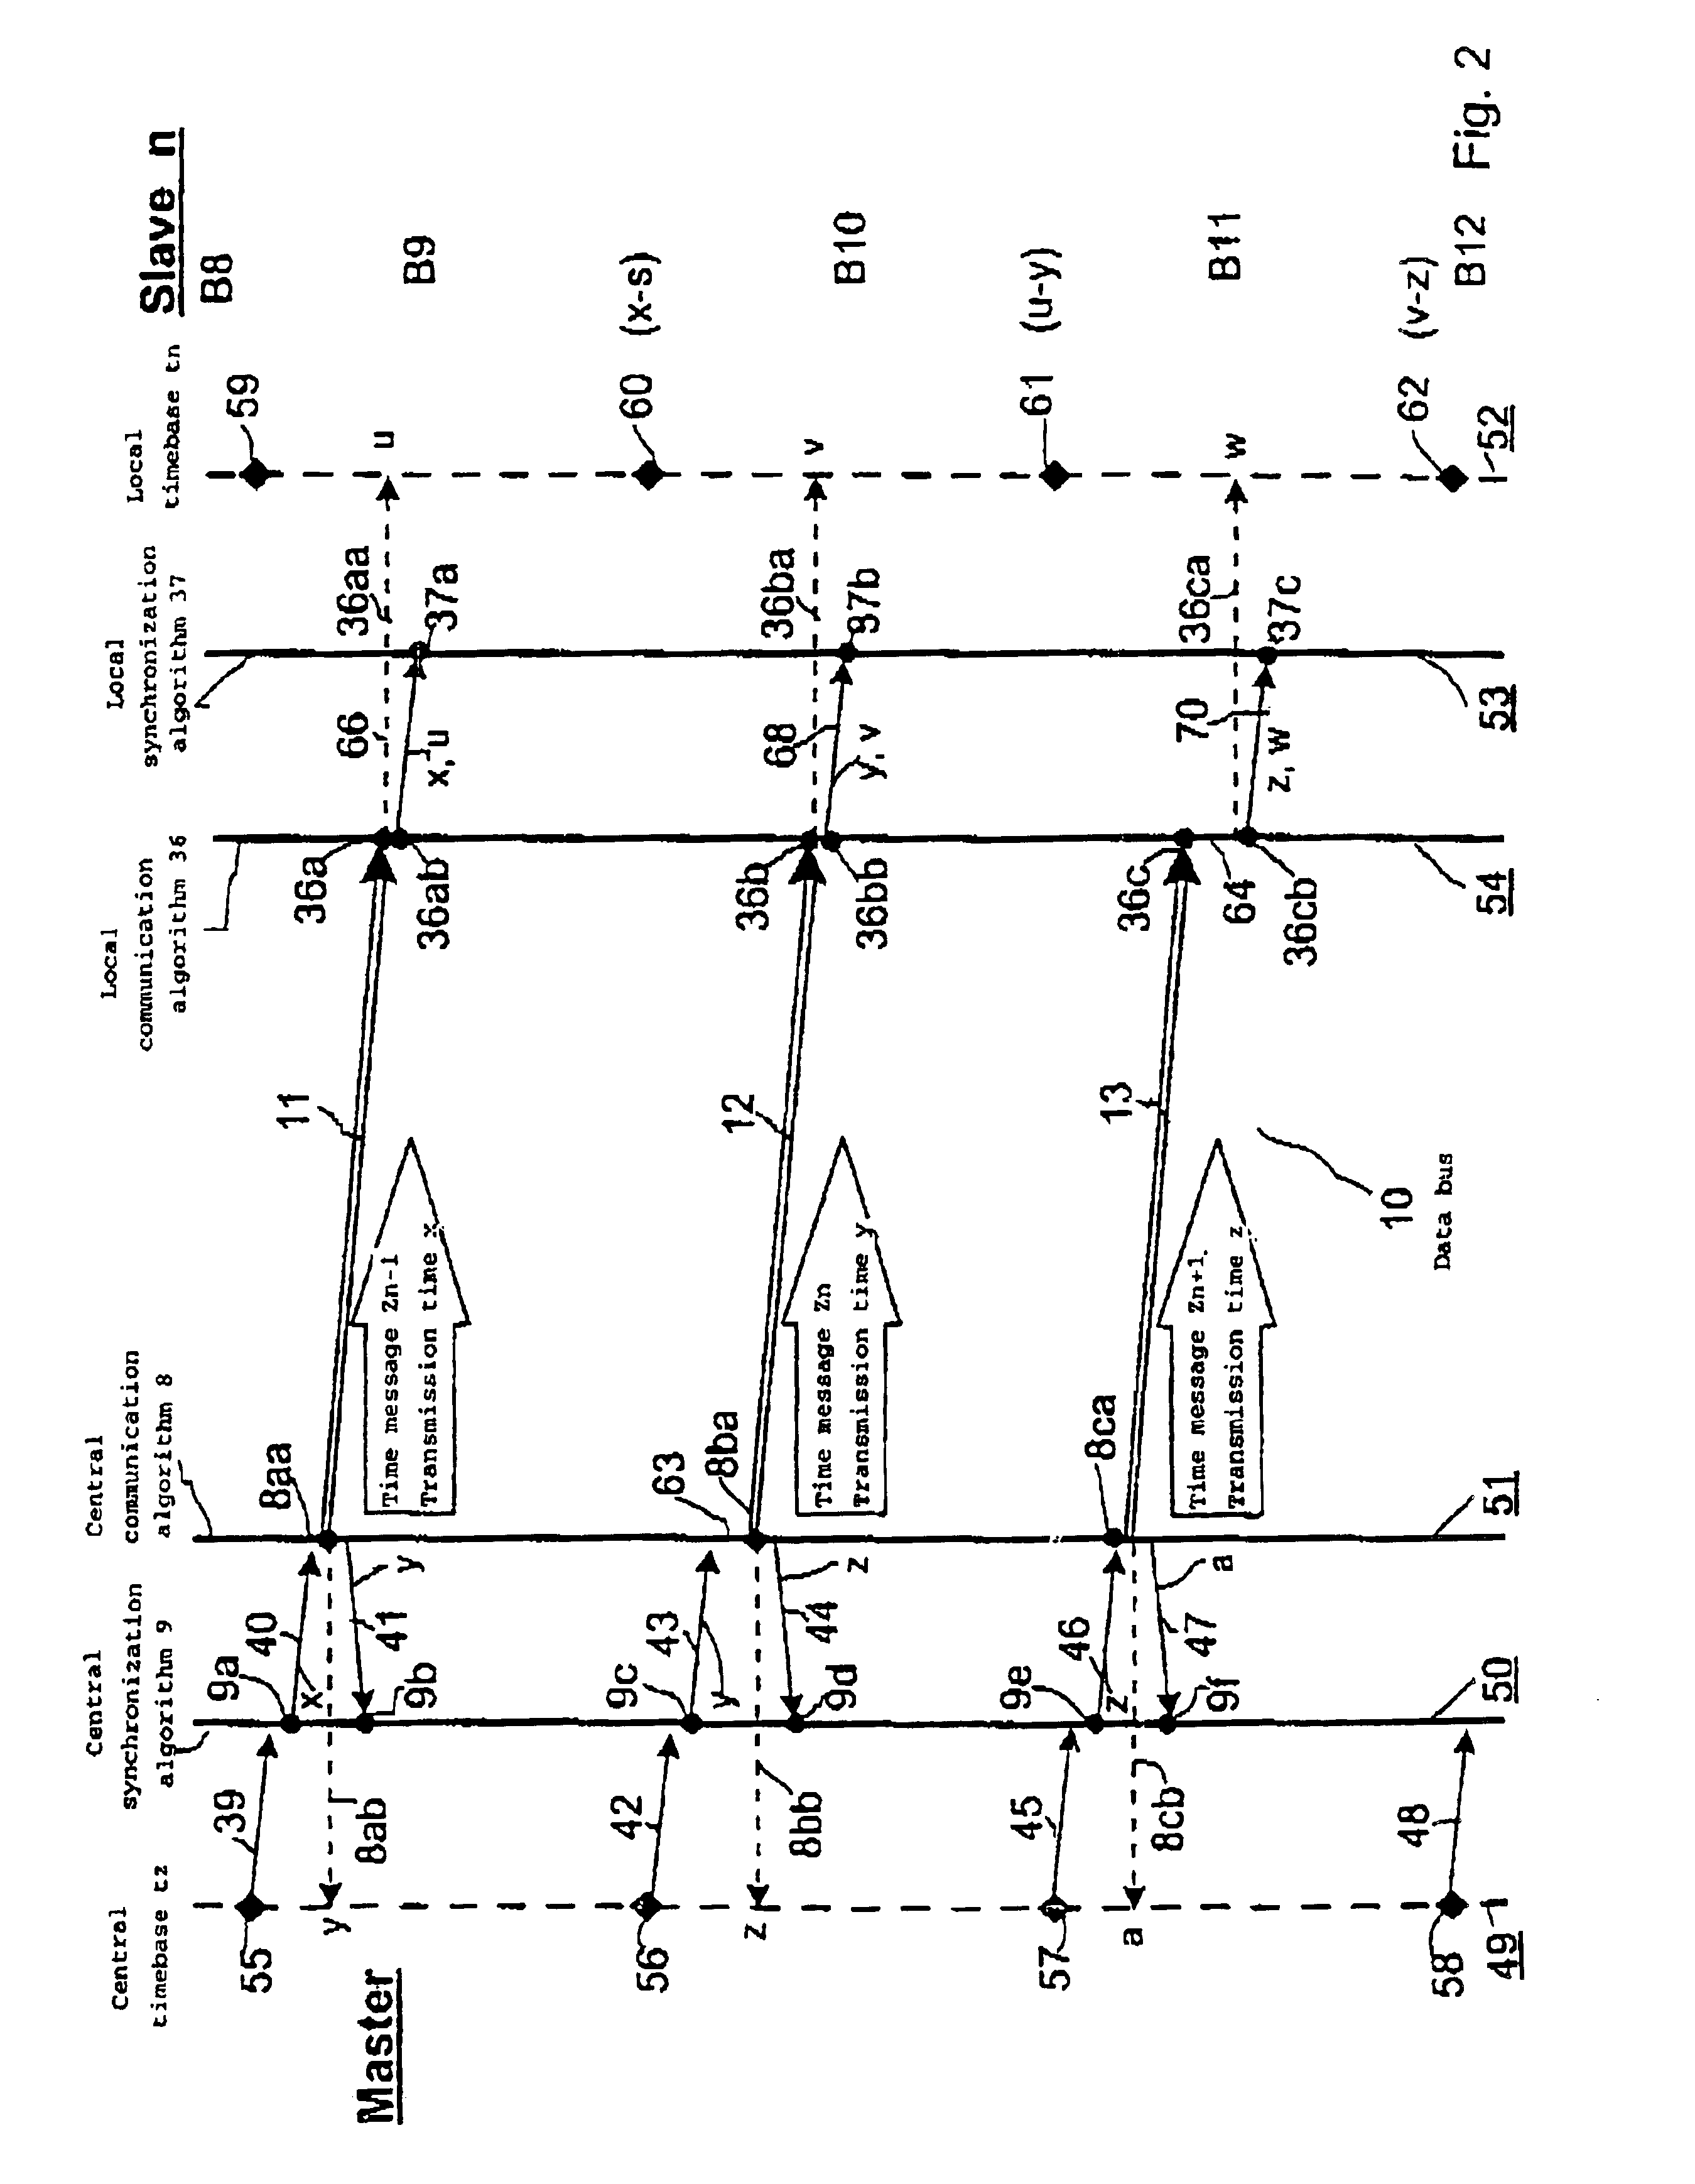 Method for synchronizing a local time base on a central time base and device for implementing said method with preferred applications